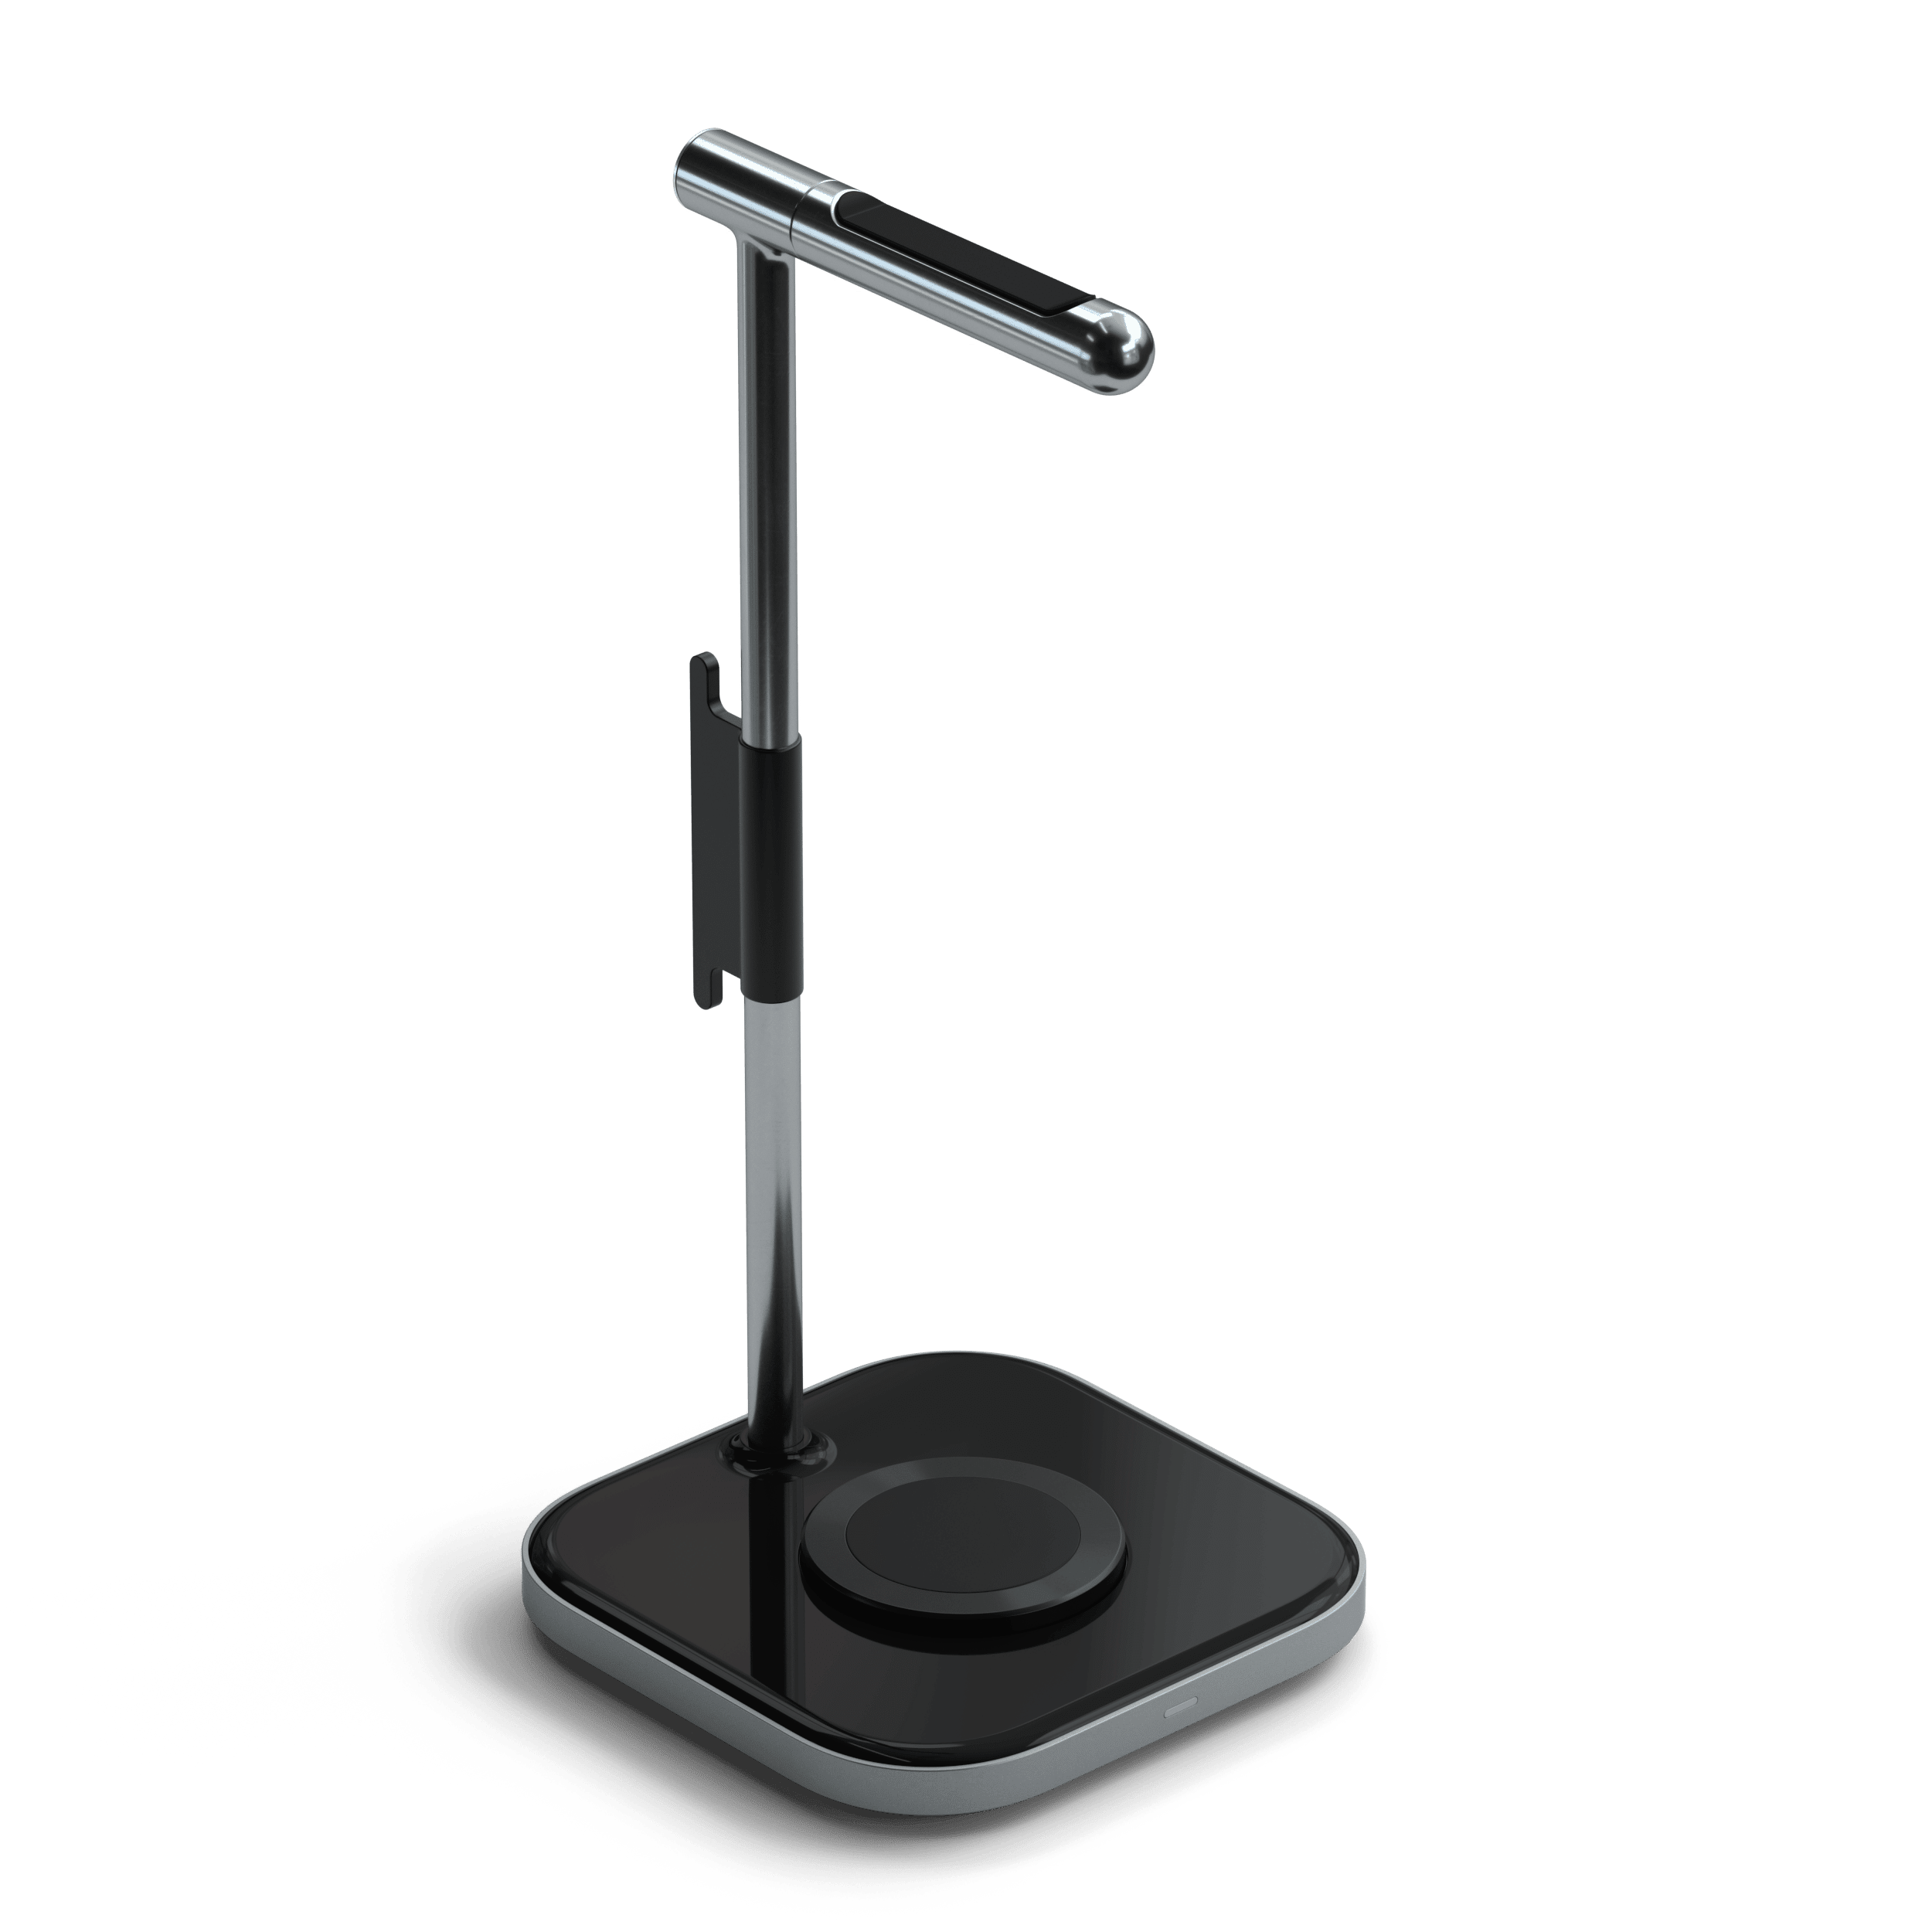 Satechi 2-in-1 Headphone Stand with Wireless Charger, Silver